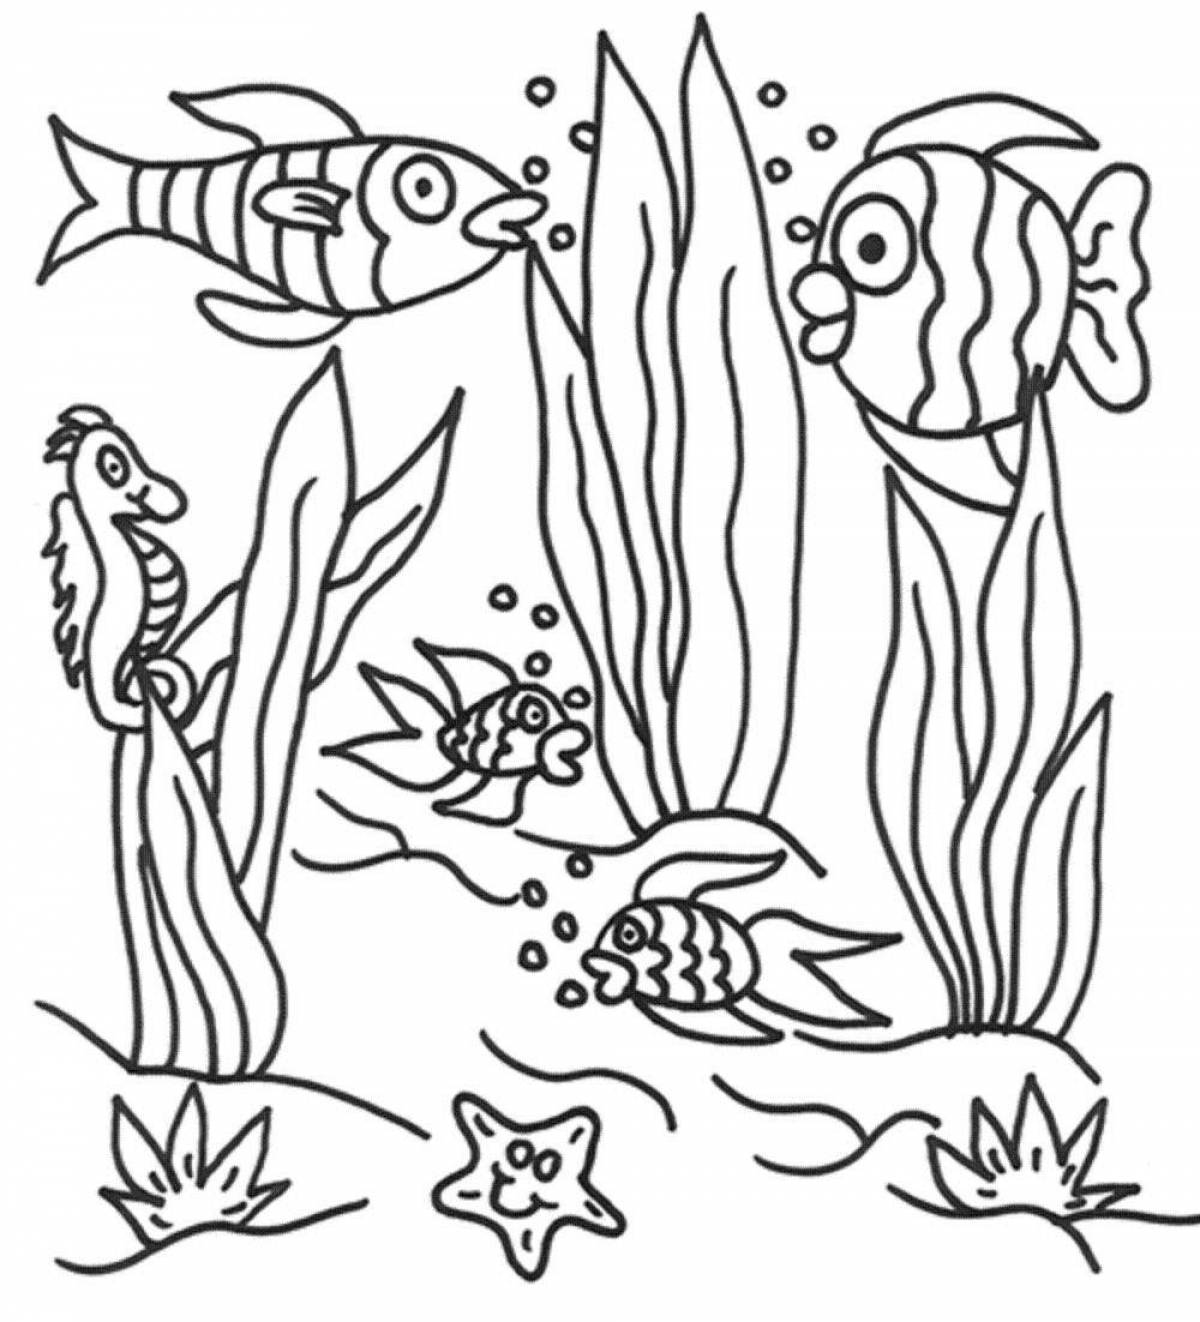 Playful seabed coloring page for kids